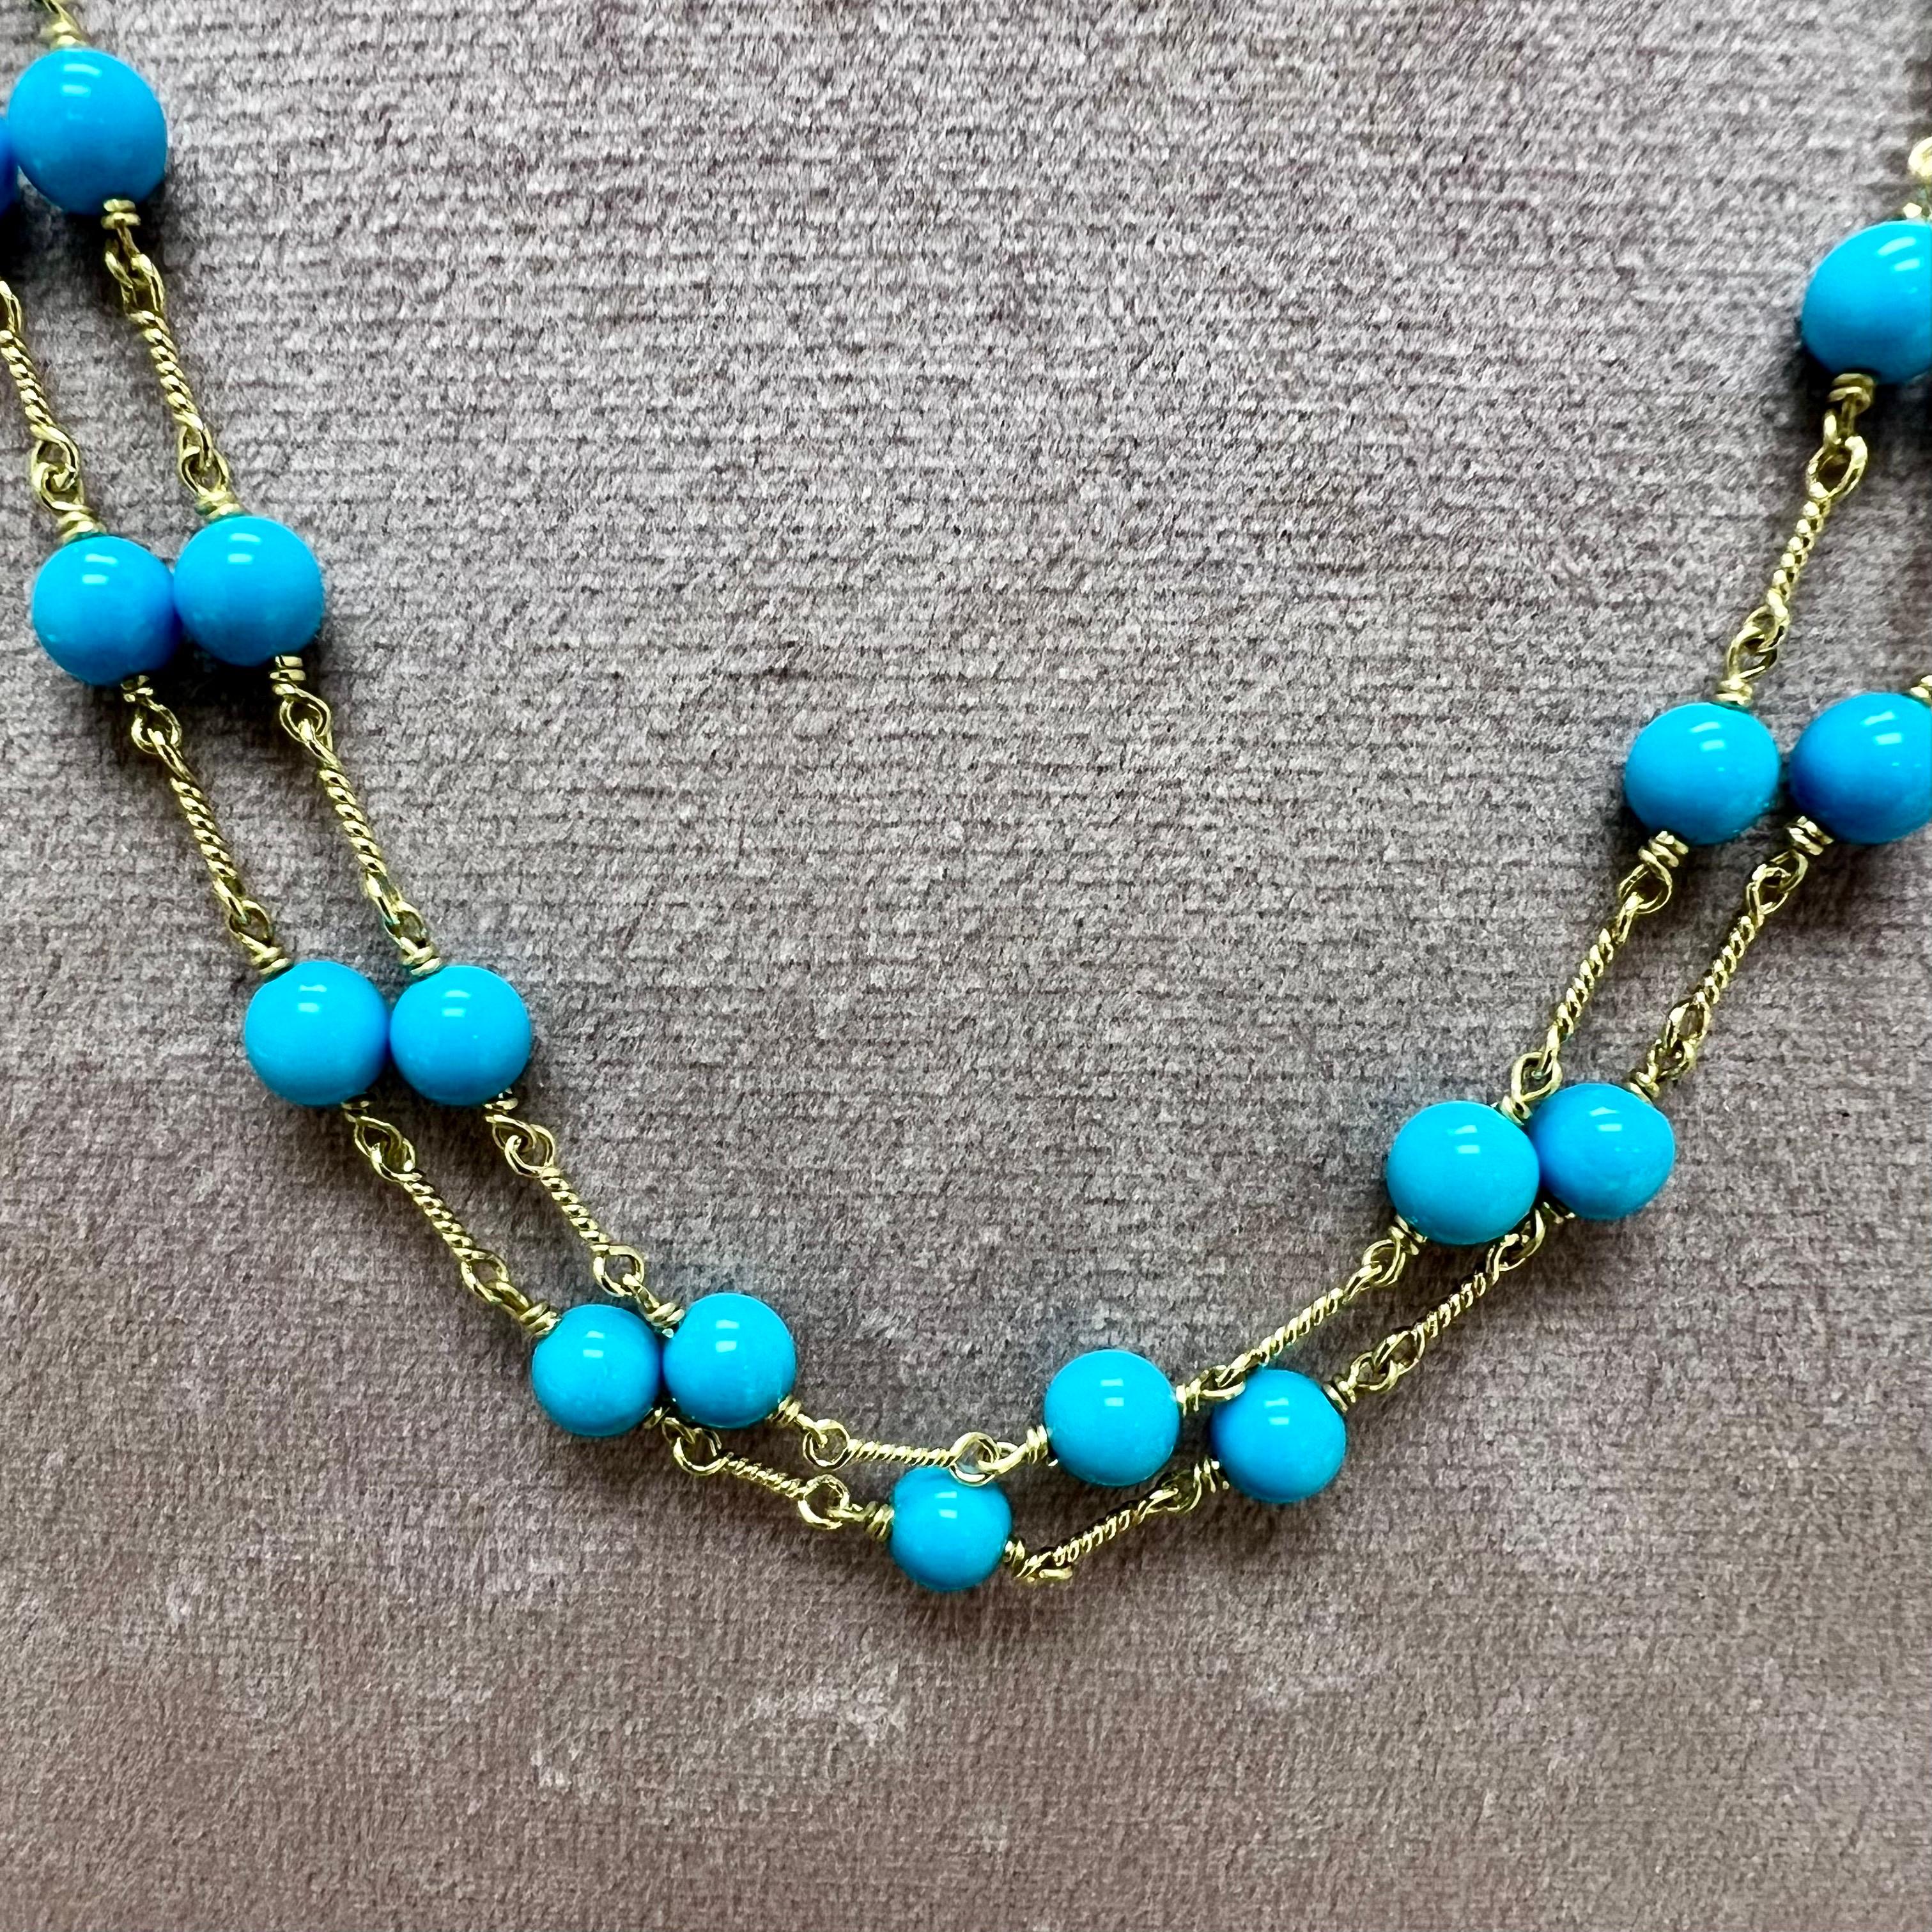 Created in 18 karat yellow gold
32 inch length
Sleeping Beauty Turquoise large beads
18kyg lobster clasp
Limited edition


About the Designers

Drawing inspiration from little things, Dharmesh & Namrata Kothari have created an extraordinary and